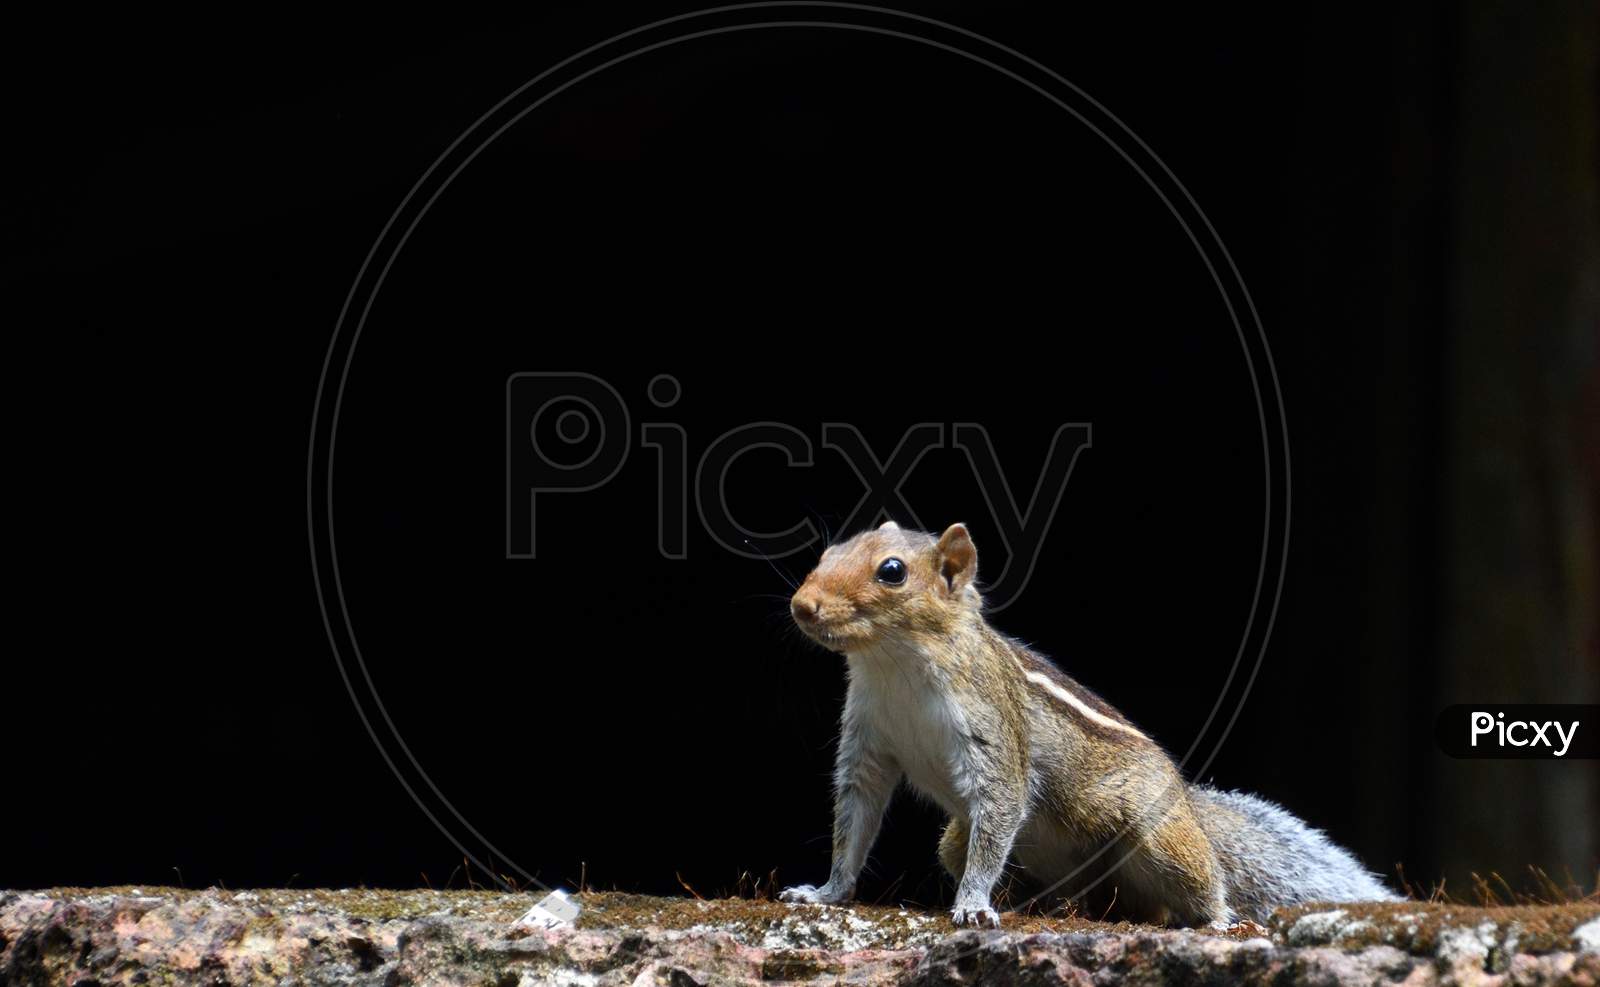 Sharp Eyes Of A Squirrel With Black Background